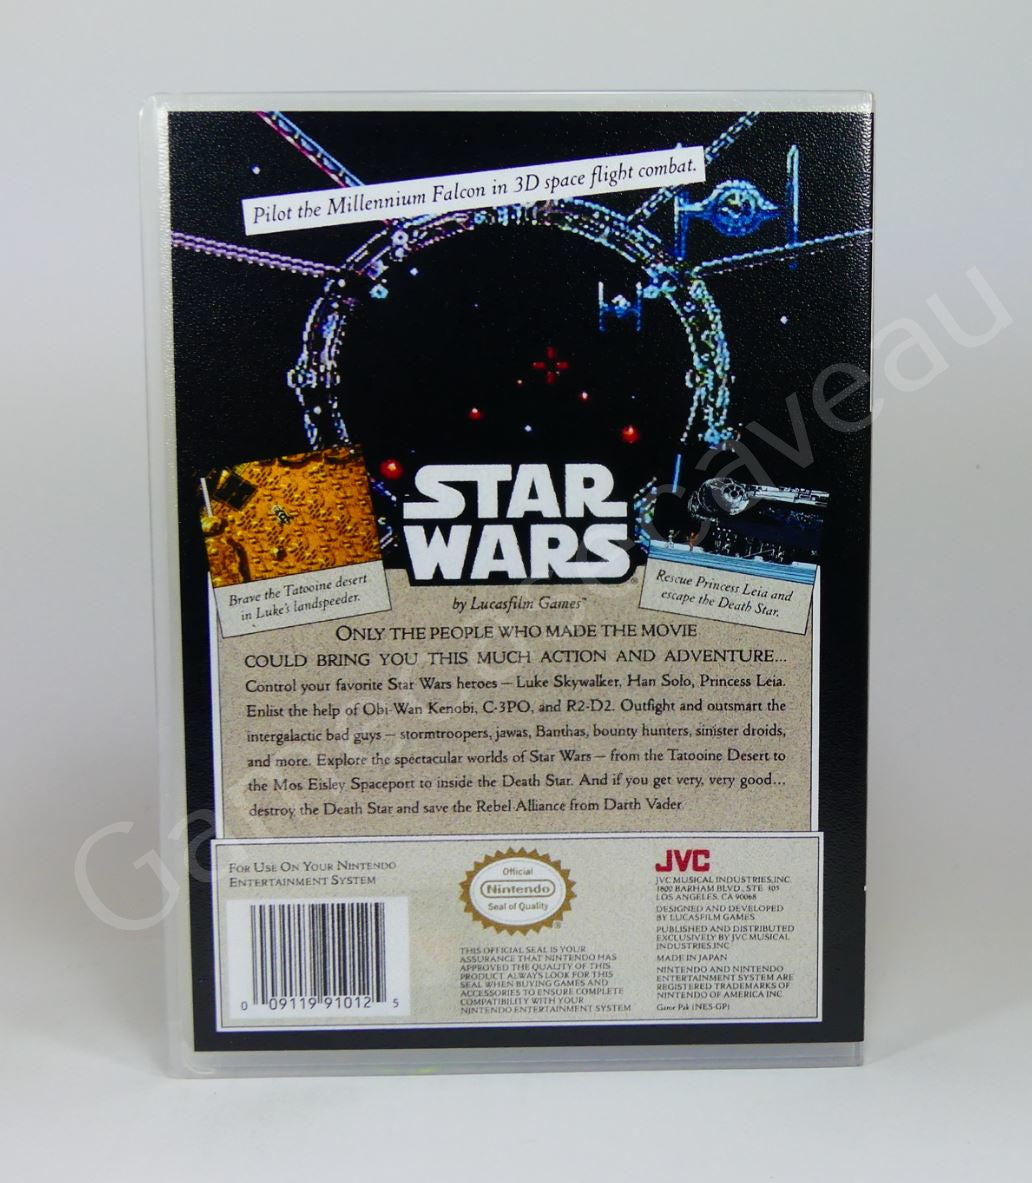 Star Wars - NES Replacement Case